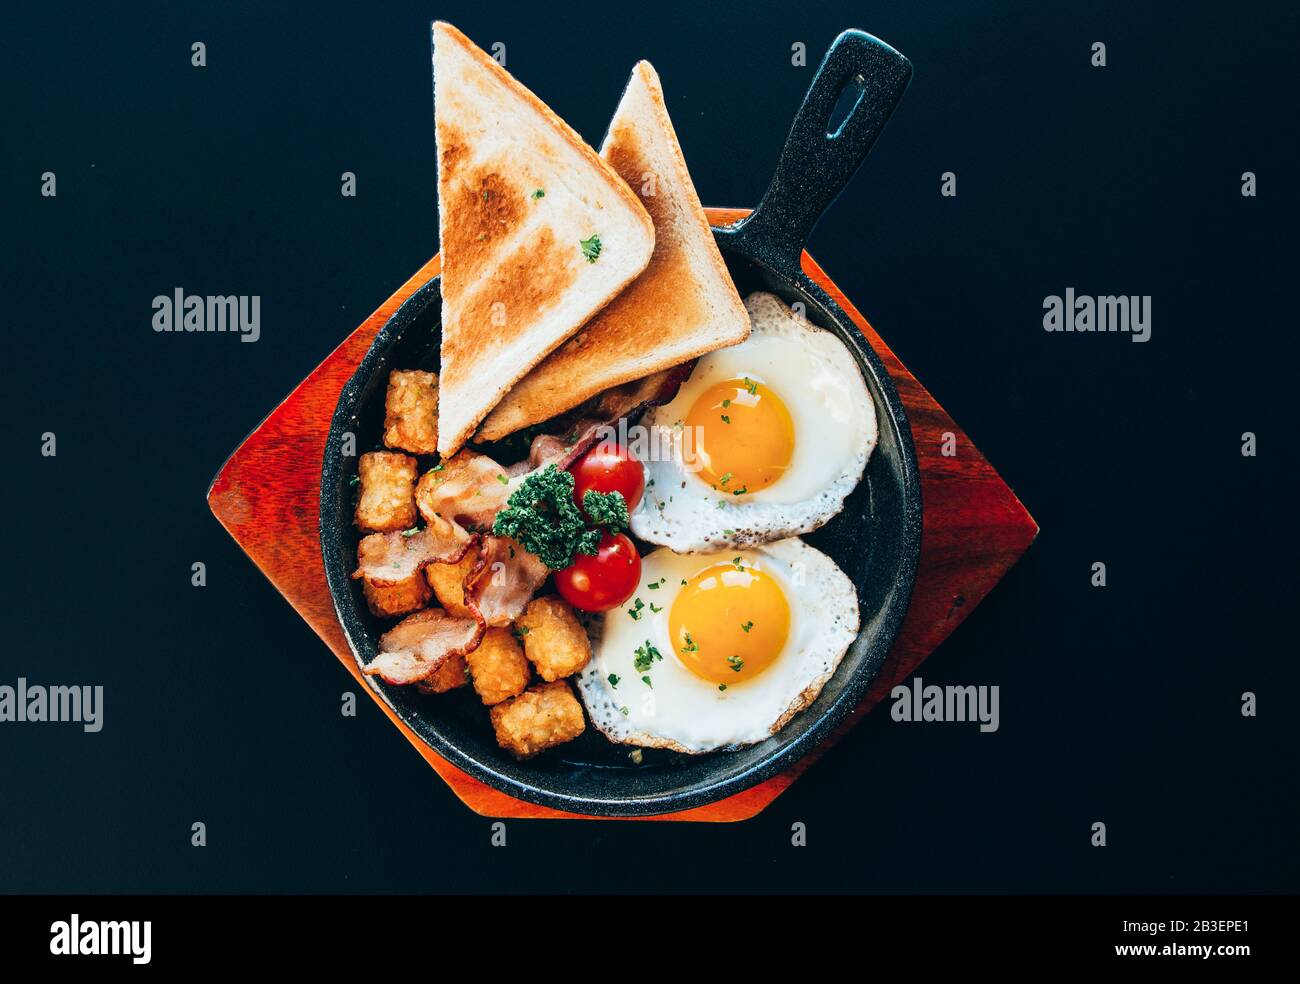 Western brunch style food with toast bread, sunny side up egg, tomatoes on a wooden plate and black background. Stock Photo